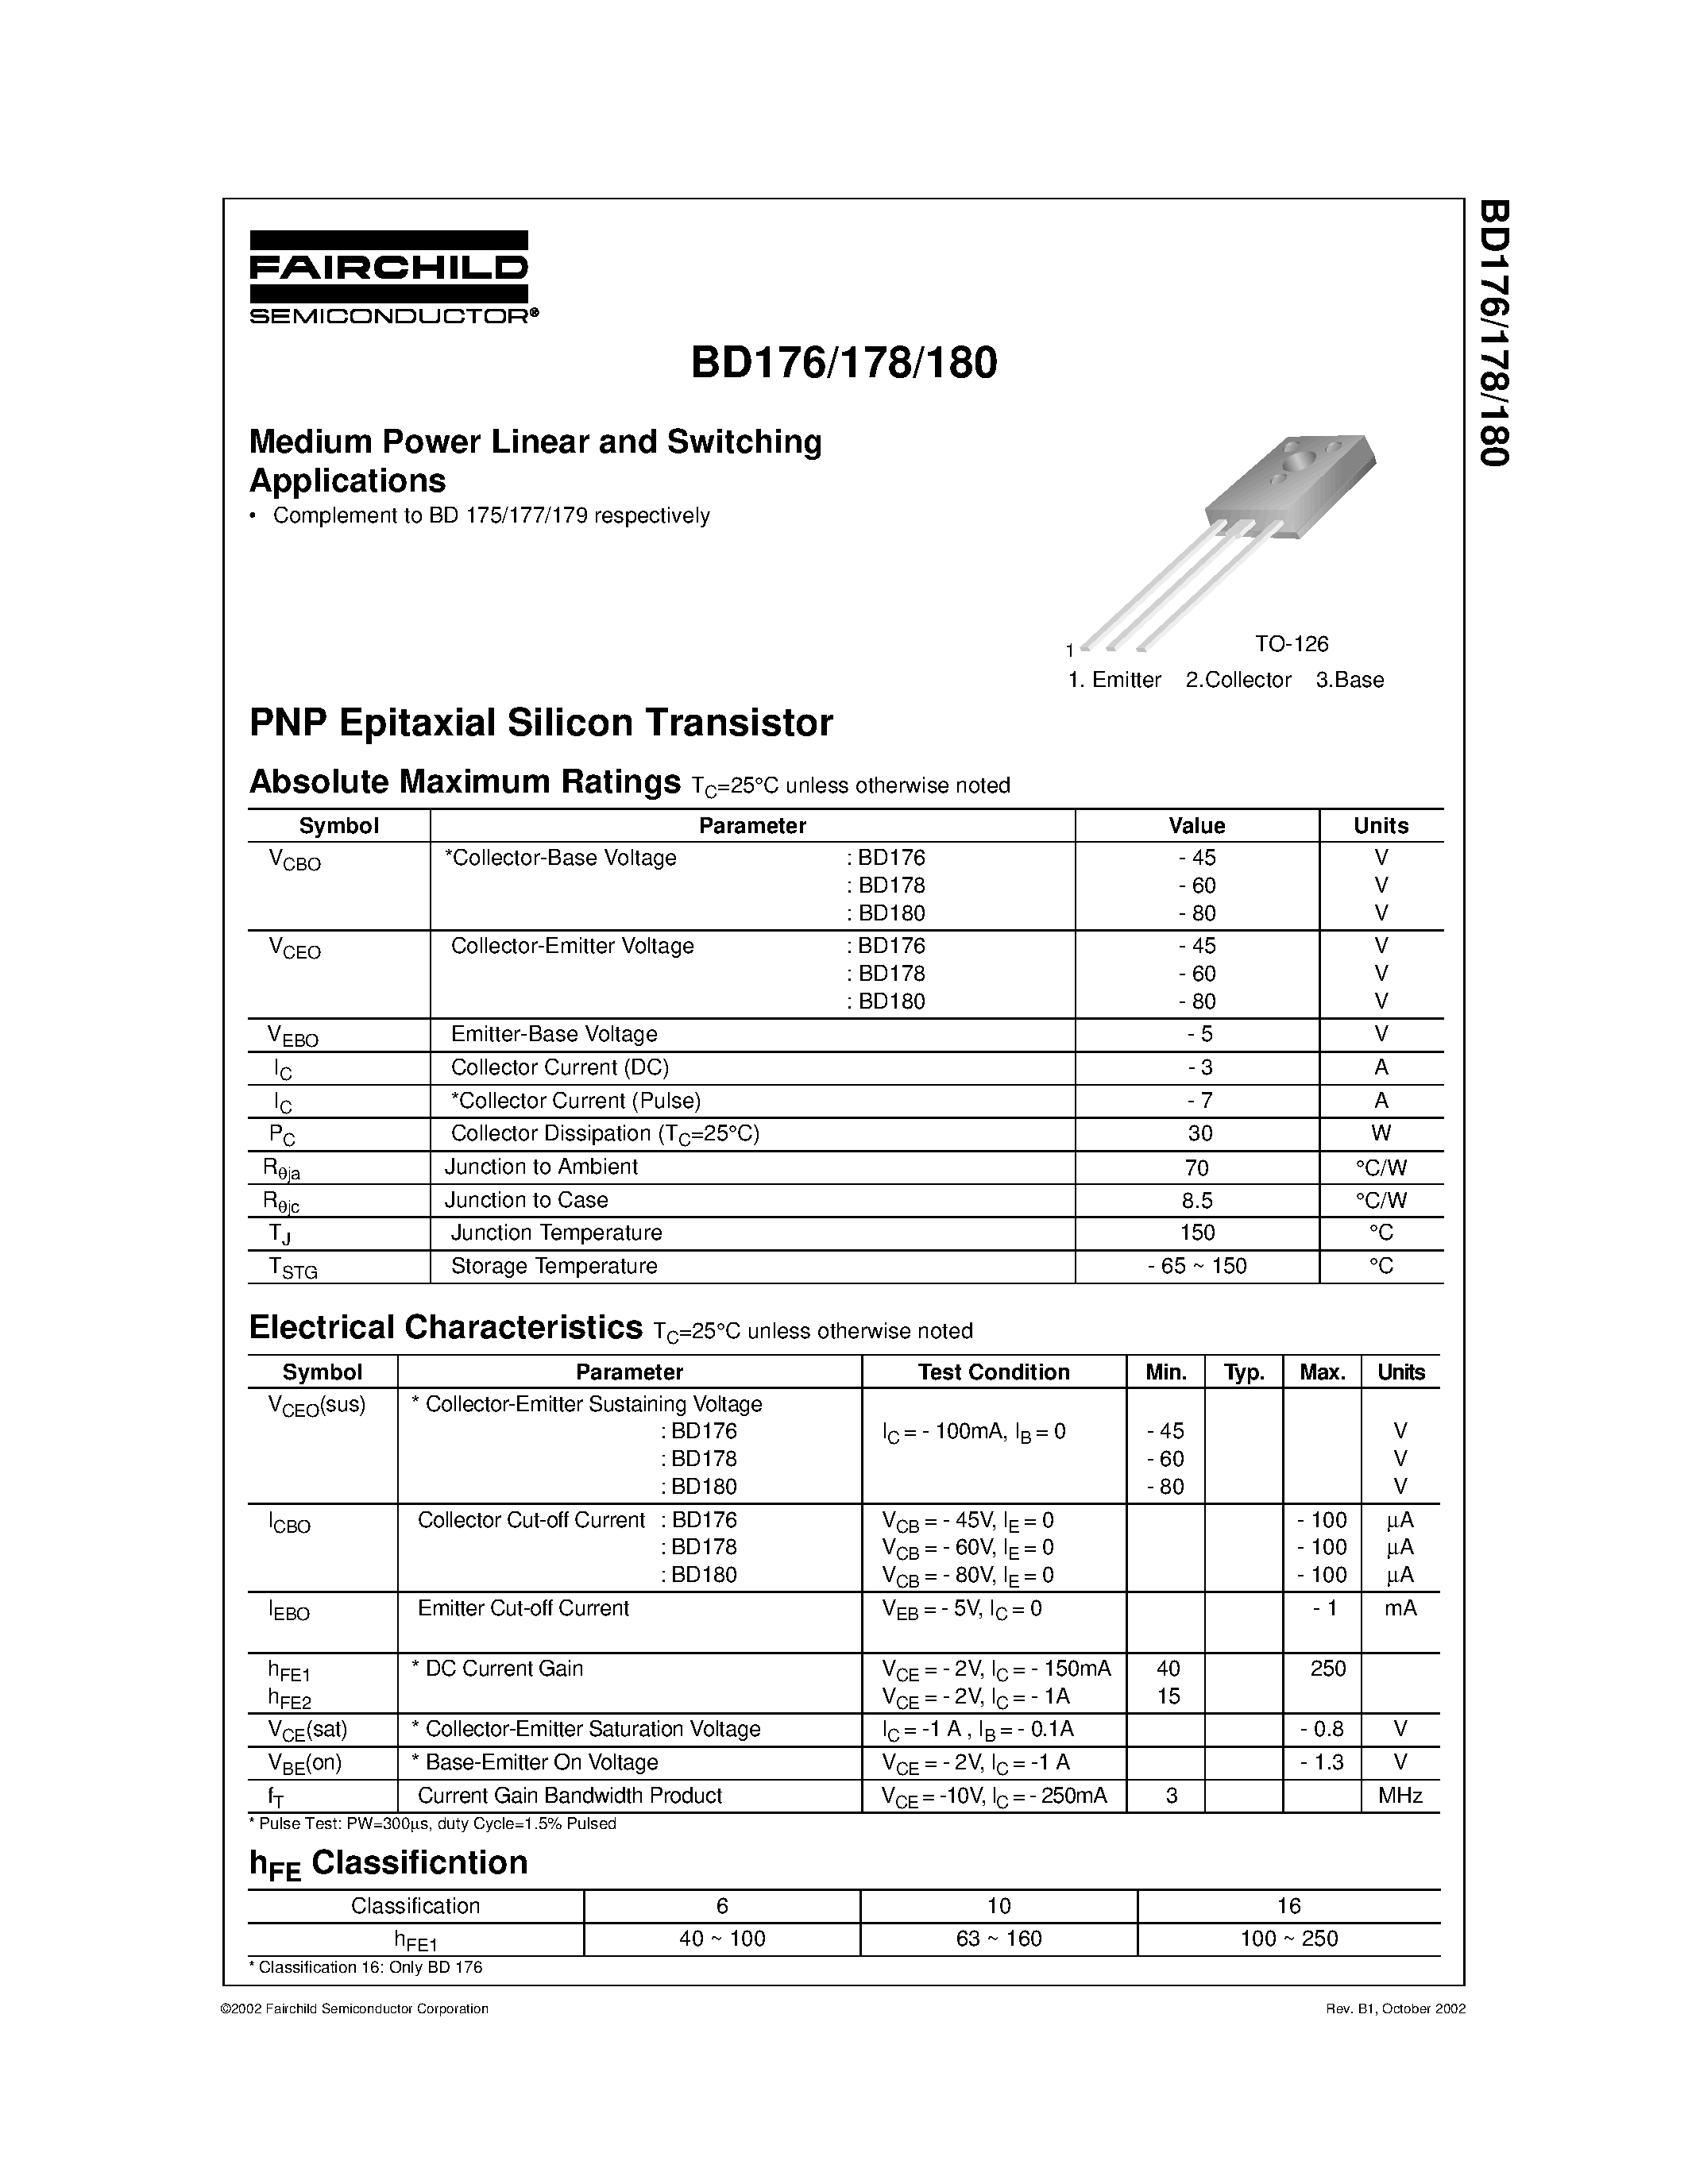 Datasheet BD180 - Medium Power Linear and Switching Applications page 1